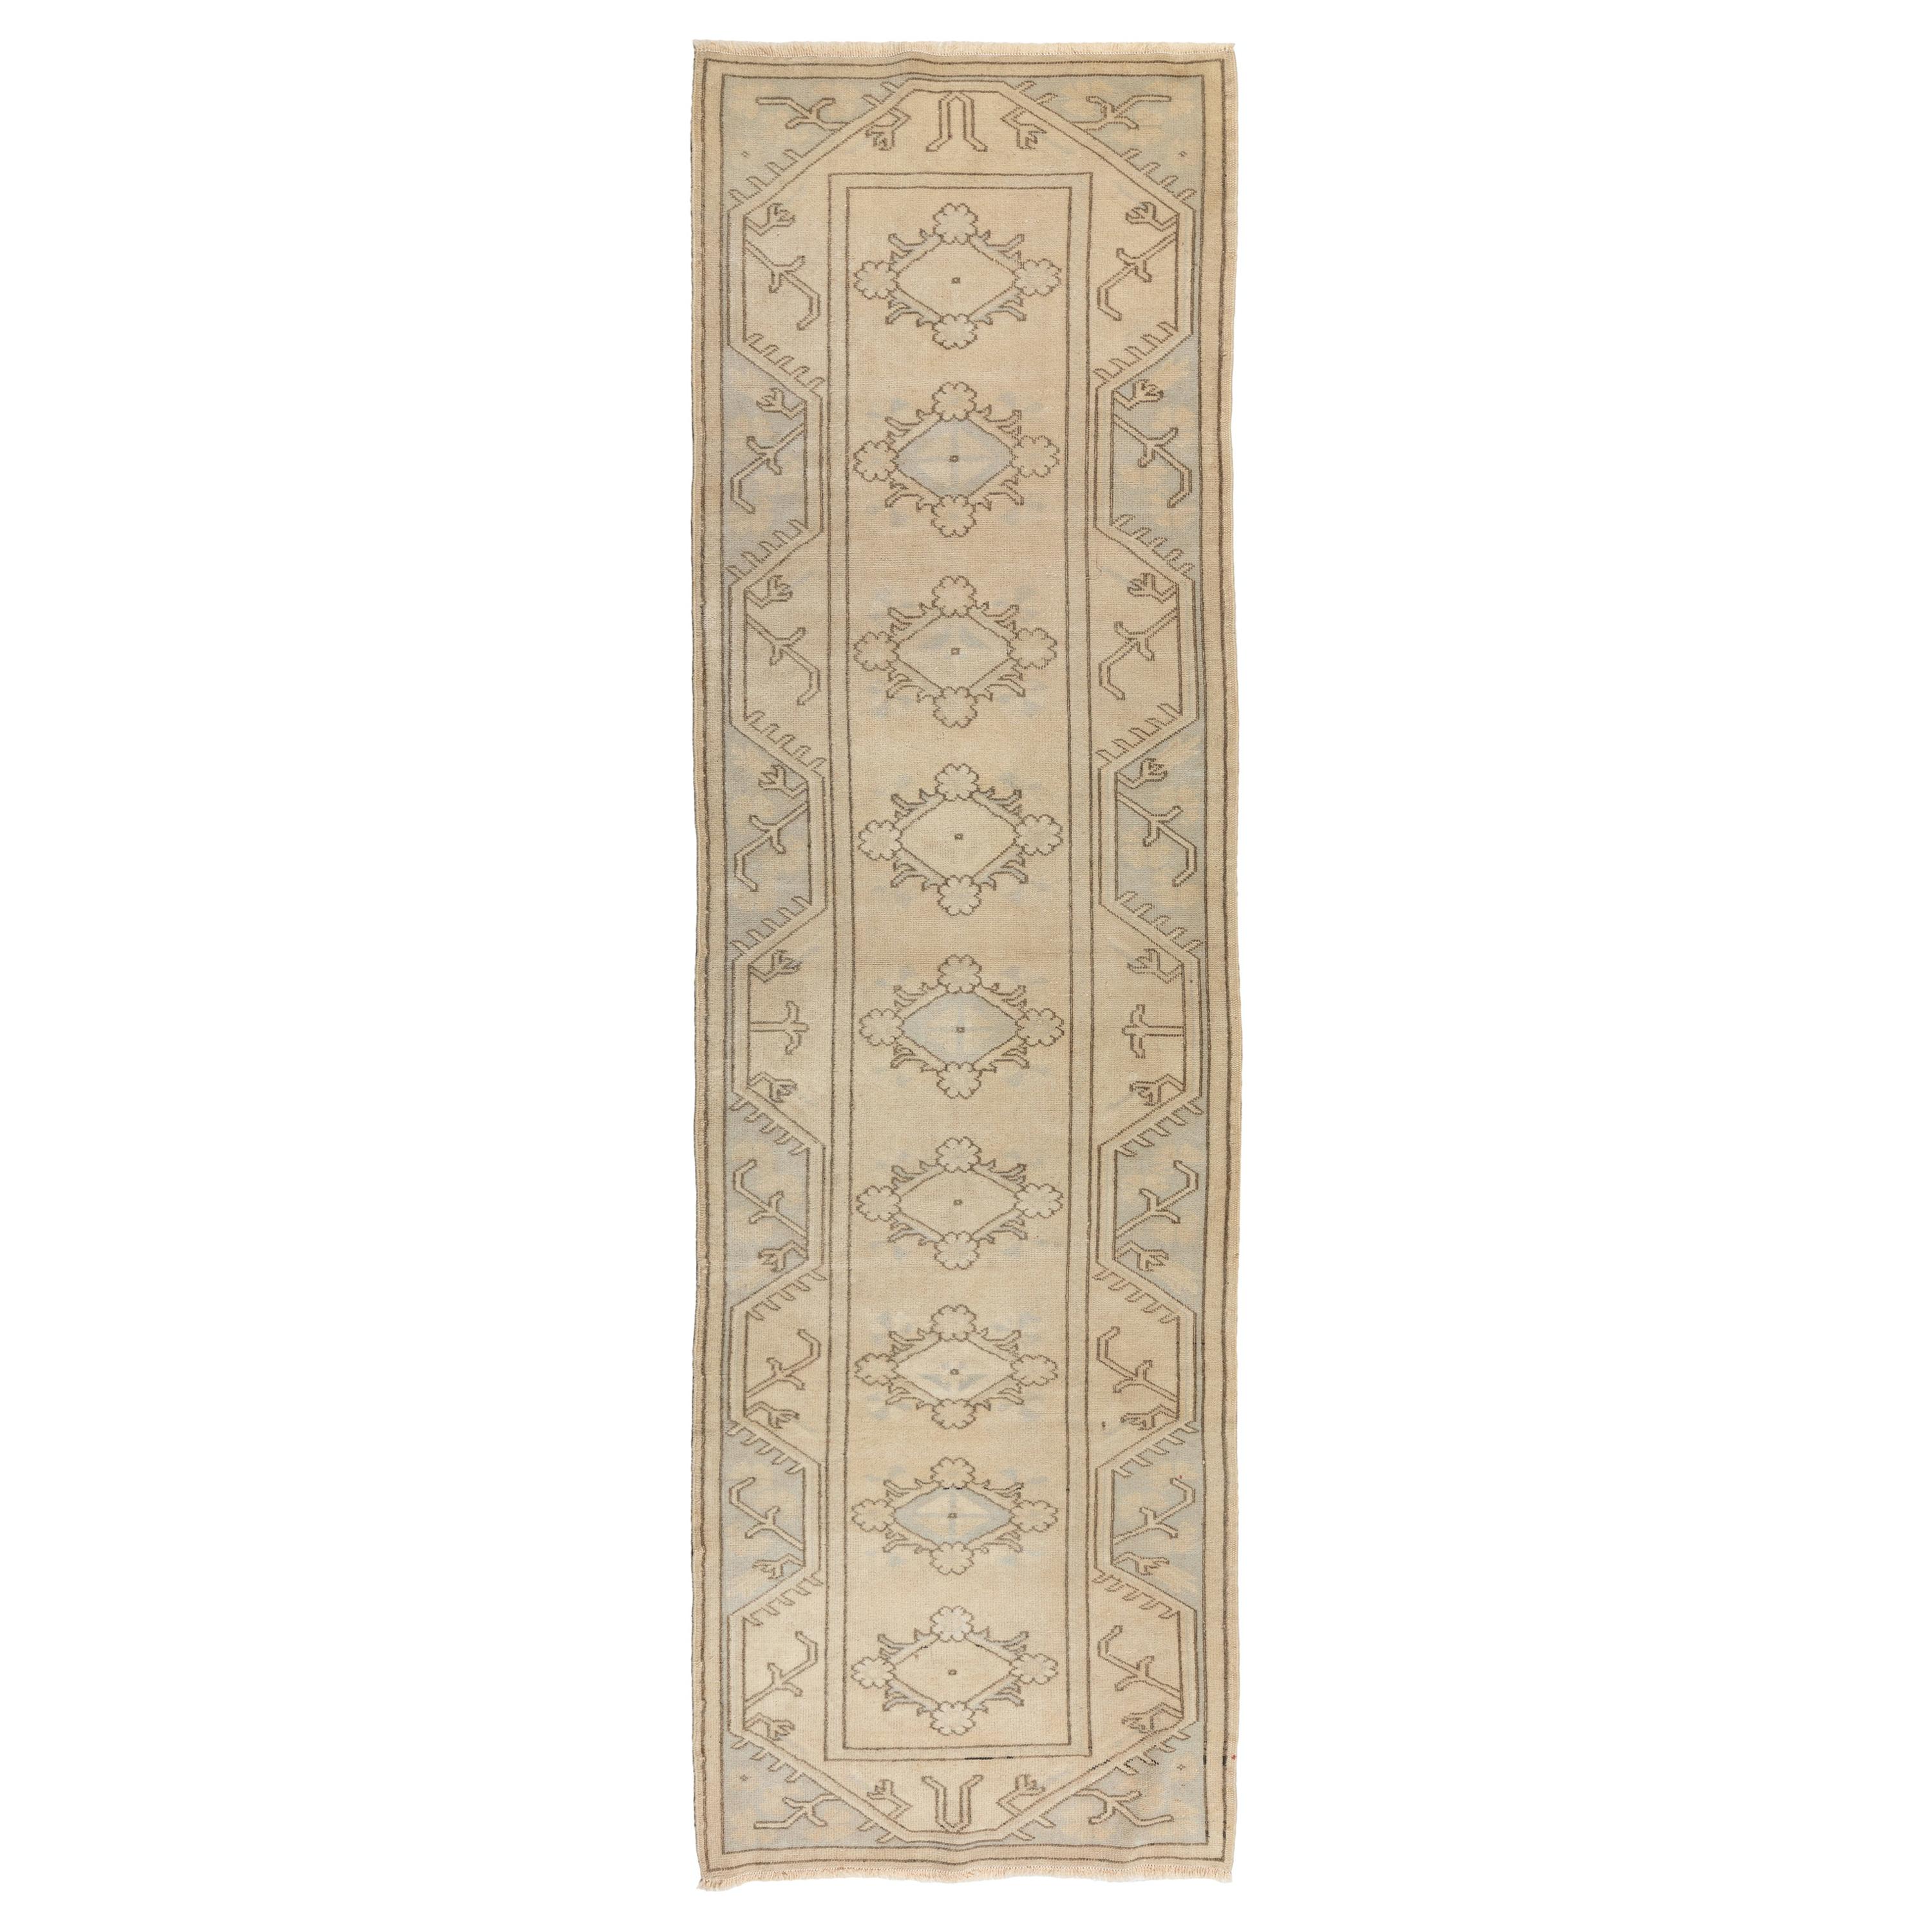 2.8x9 Ft Vintage Hand-Knotted Turkish Runner Rug in Soft, Neutral Colors